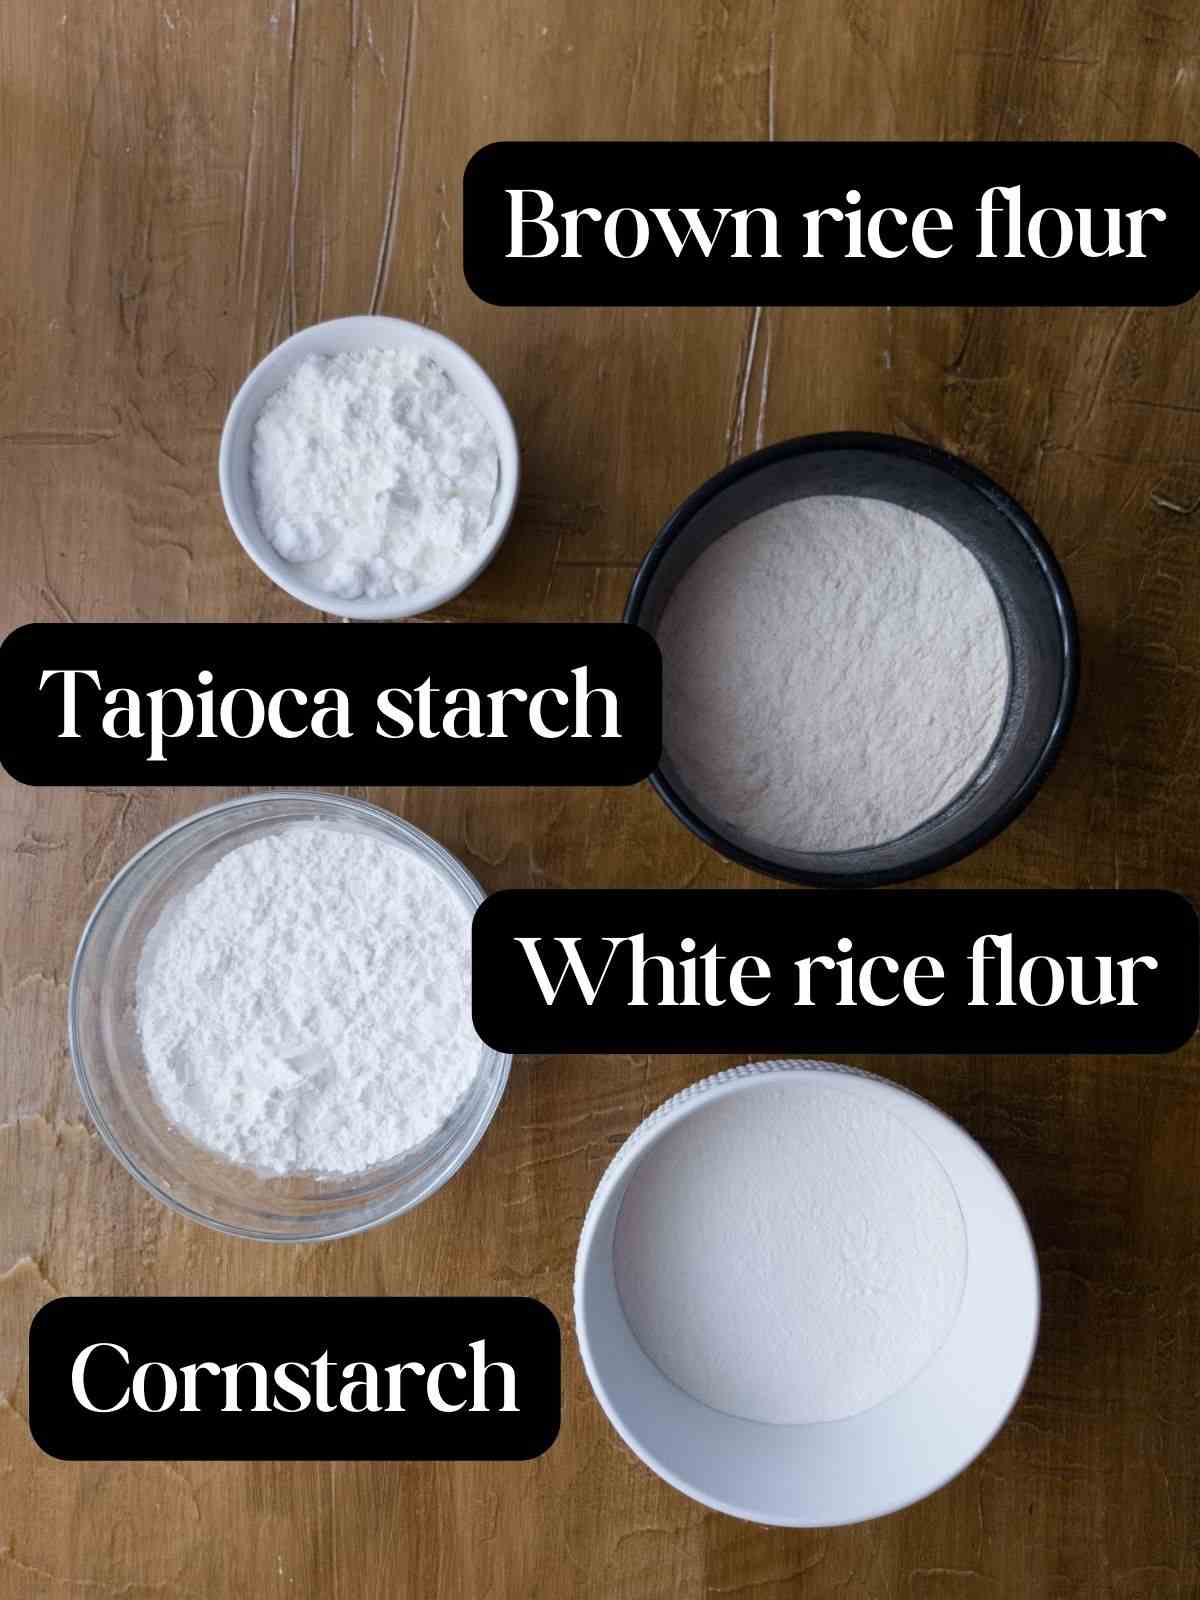 Different GF flours in bowls on a wooden surface.